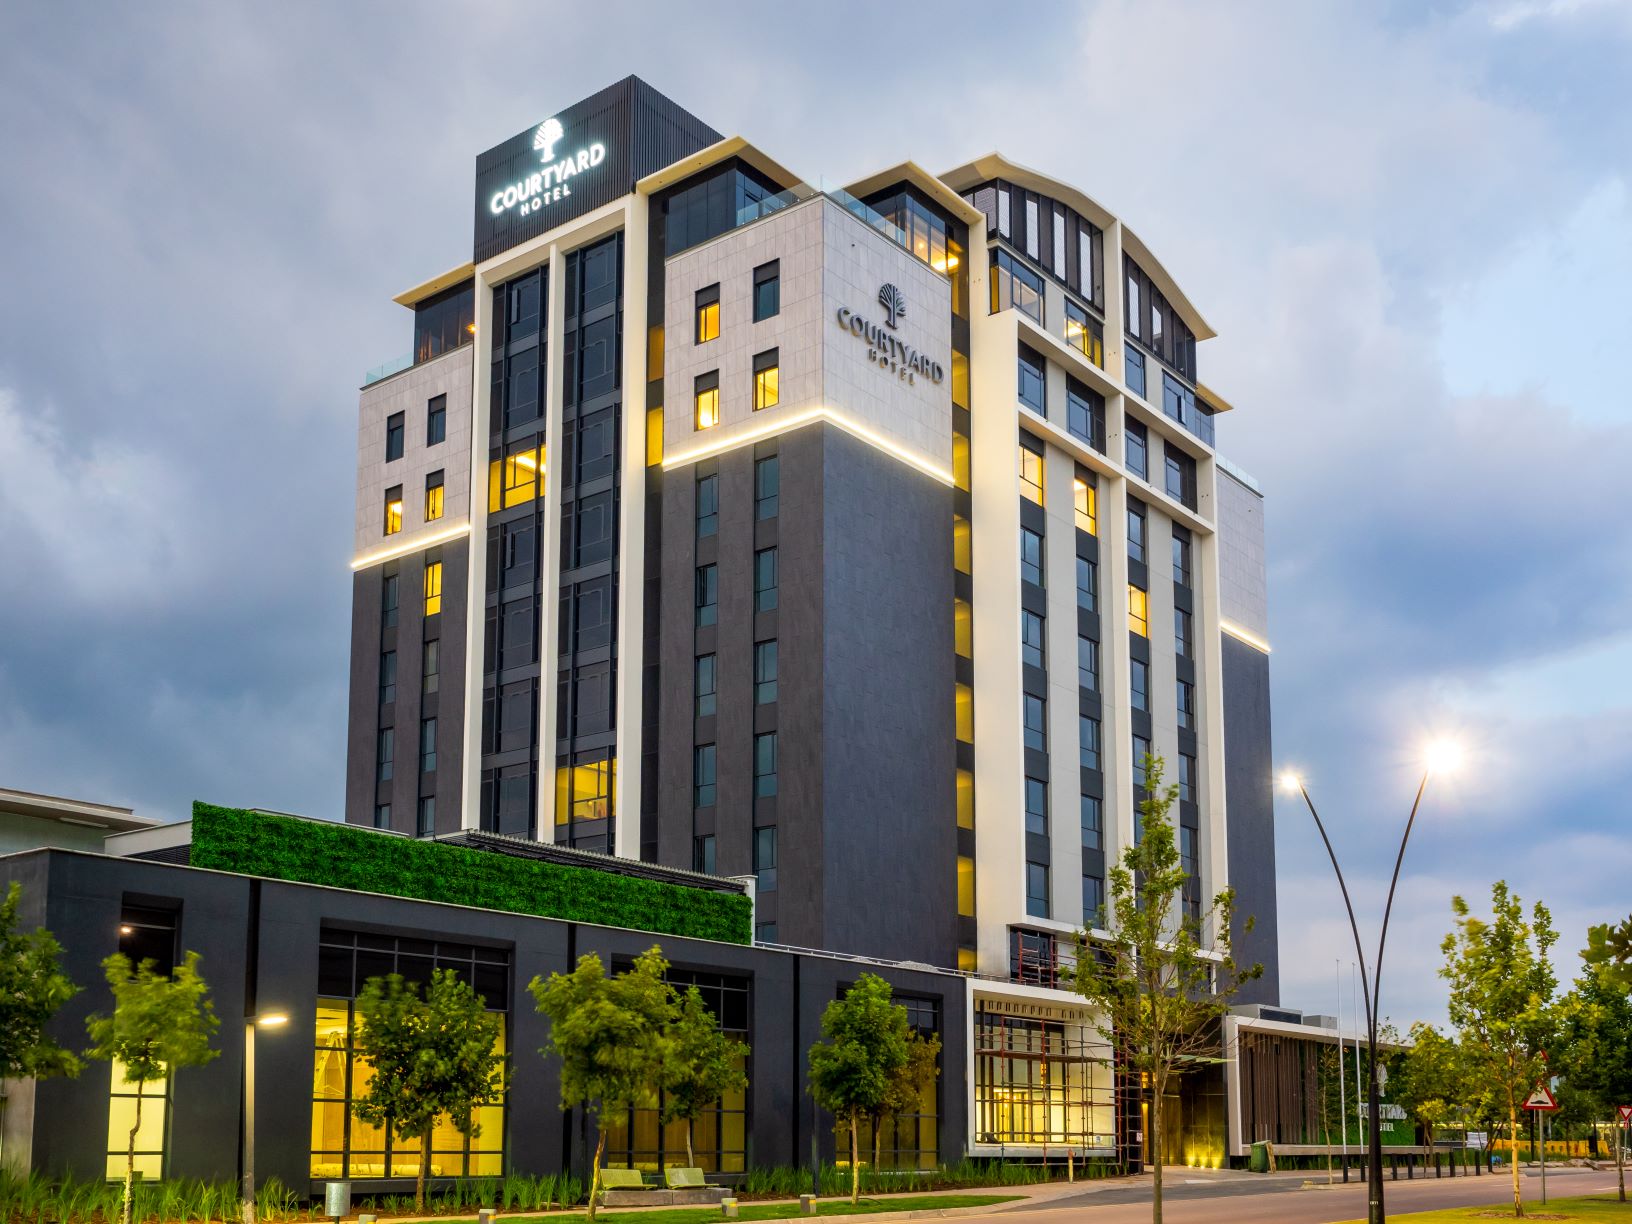 New Johannesburg hotel set to open soon Southern & East African